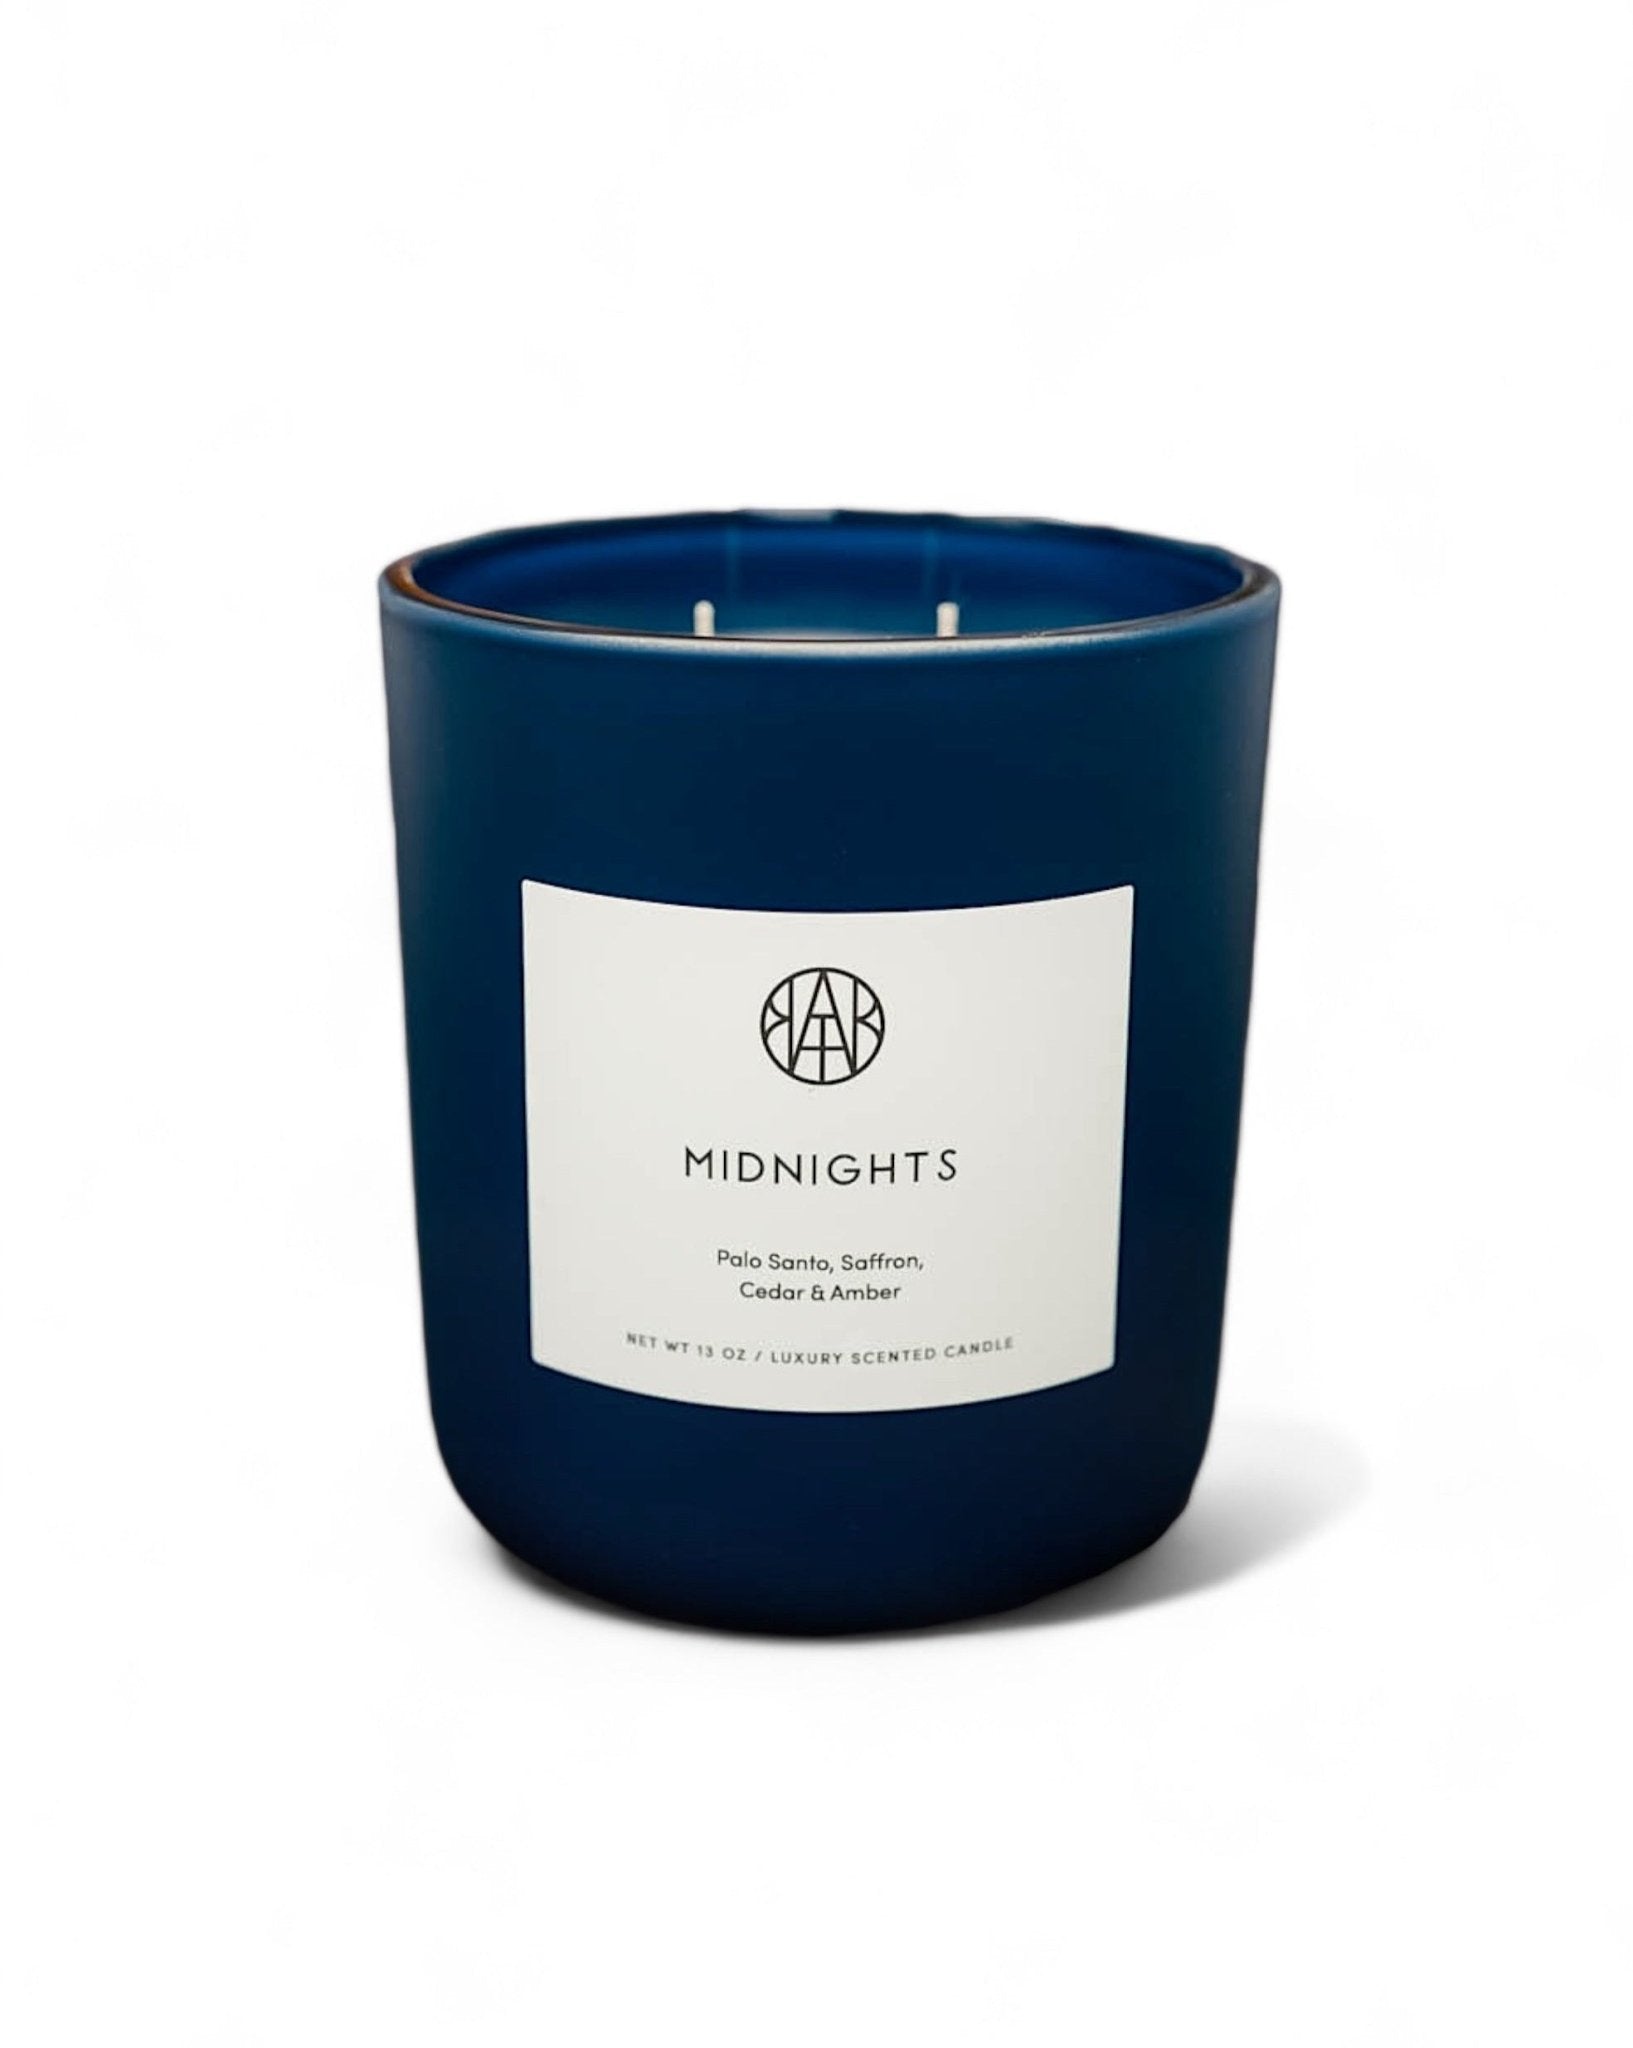 MIDNIGHTS - Deluxe Candle - AEMBR - Clean Luxury Candles, Wax Melts & Laundry Care